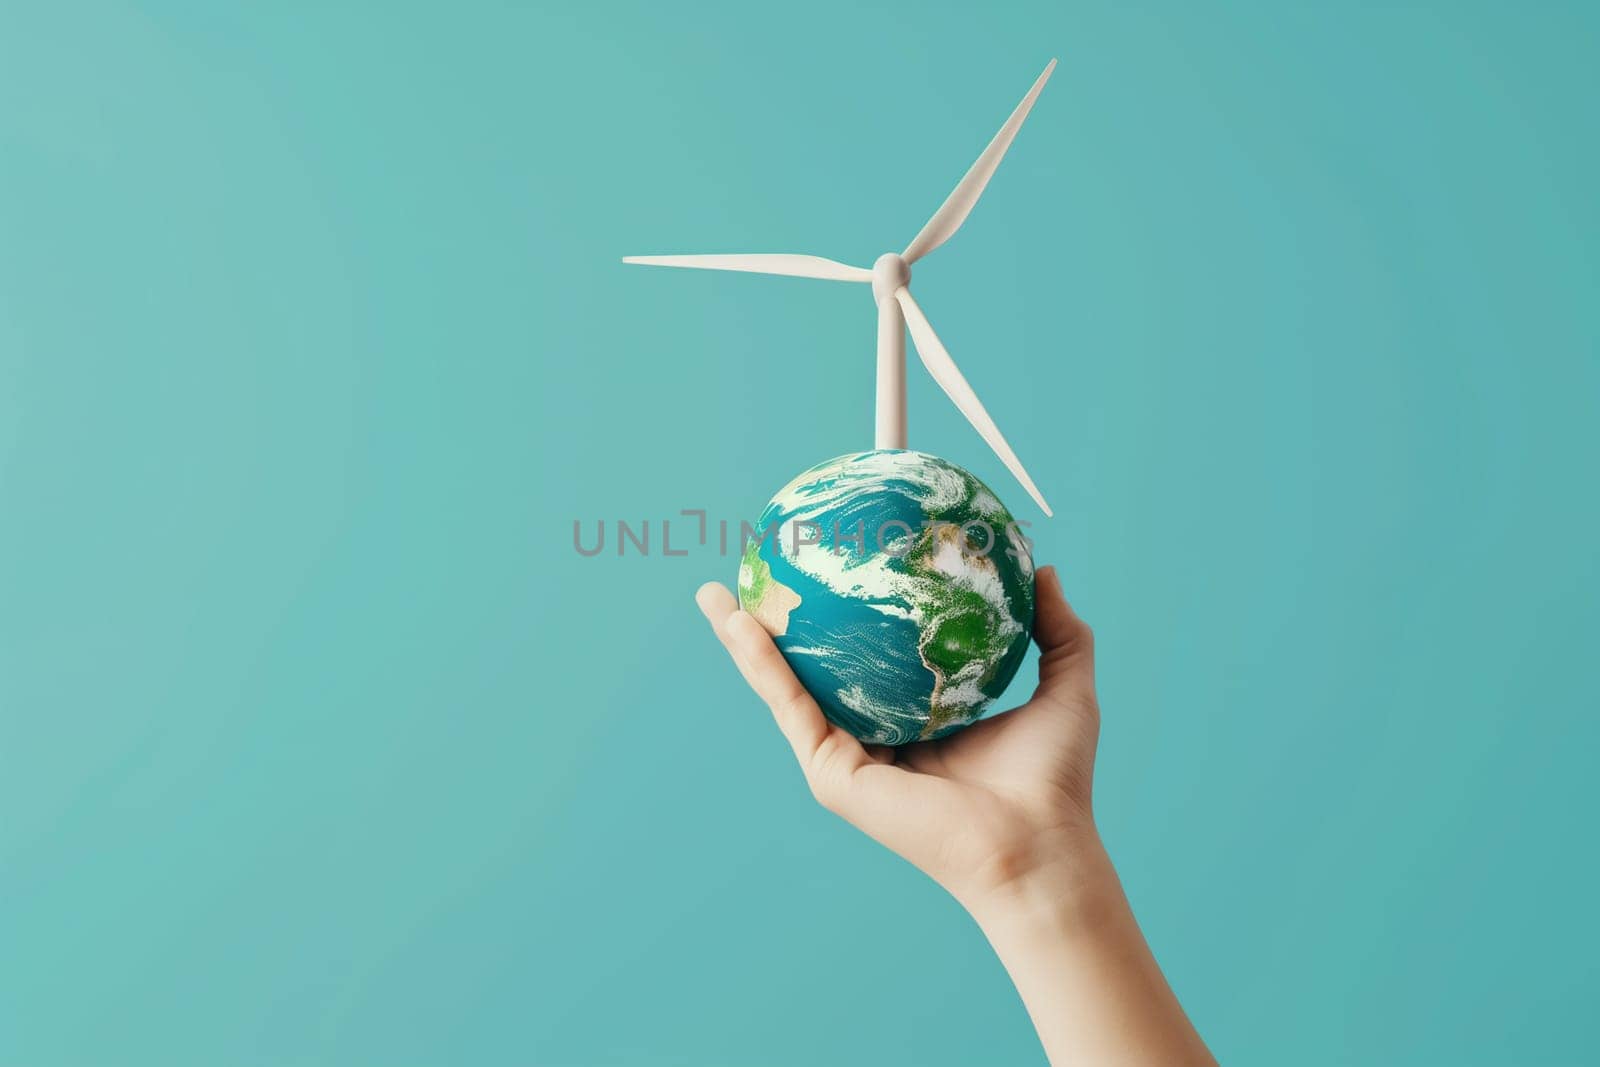 A hand is holding a small model of the Earth with a wind turbine visible in the background.